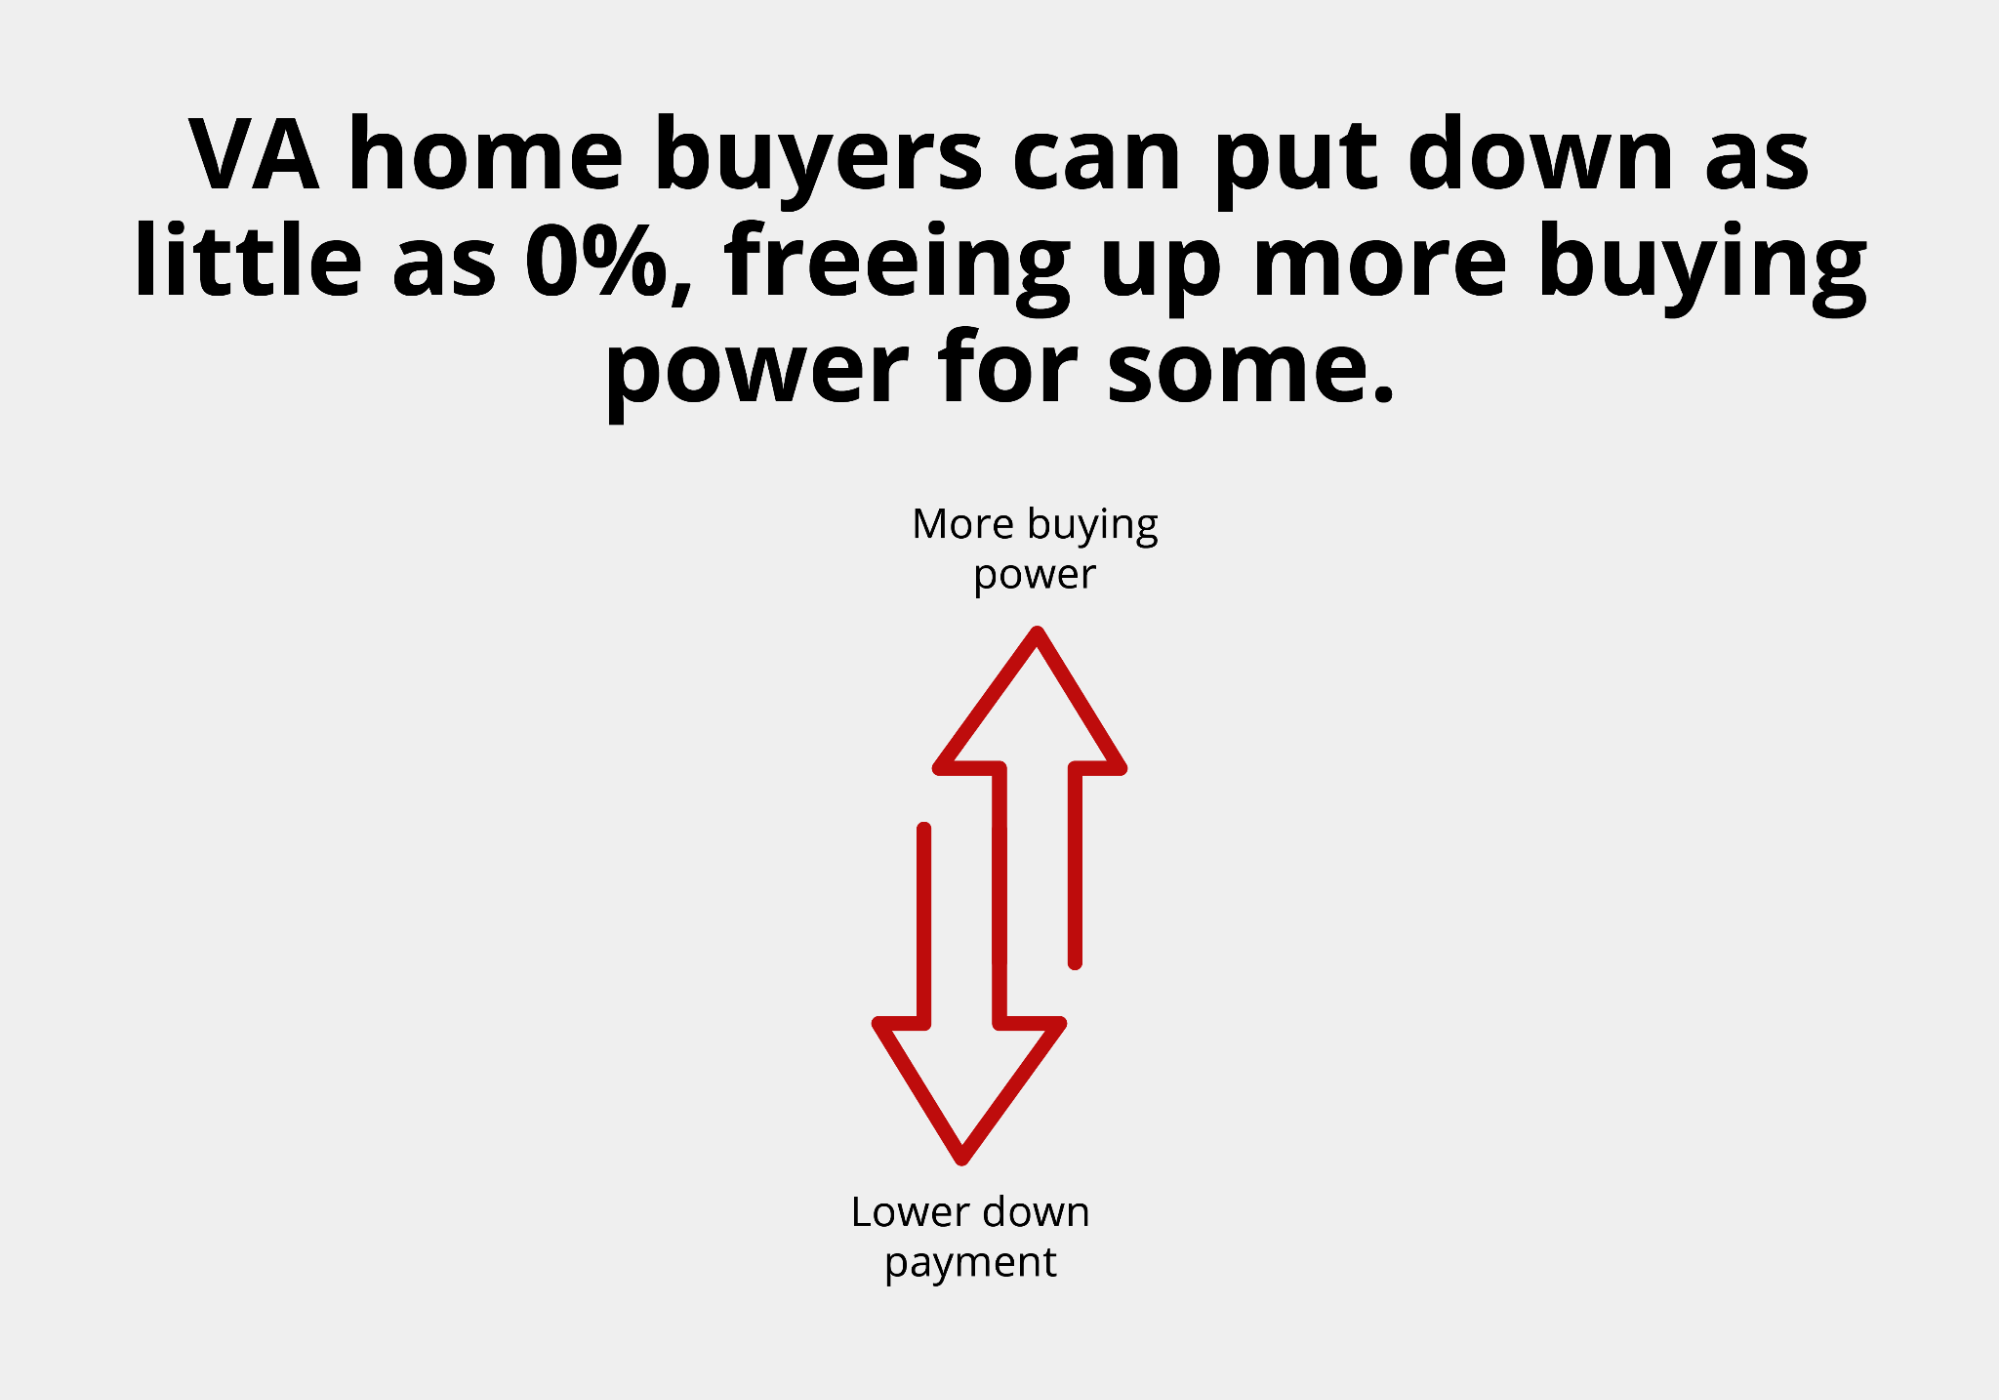 Graphic with text at the top that reads “VA home buyers can put down as little as 0%, freeing up more buying power for some.” Below the text, there is one arrow facing downward that reads “Lower down payment” and one arrow facing upwards that reads, “More buying power”.